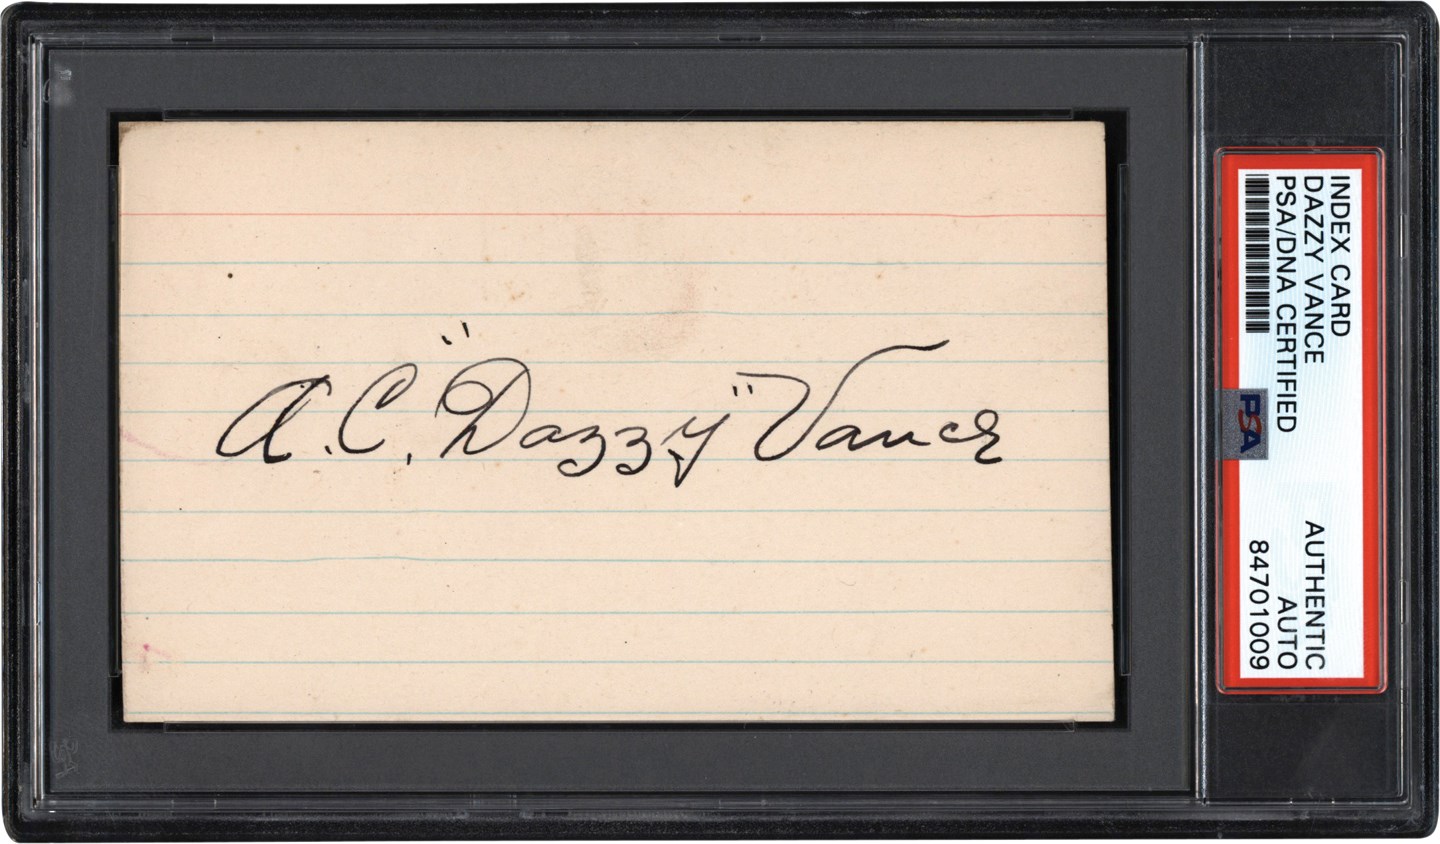 - Dazzy Vance Signed Index Card (PSA)